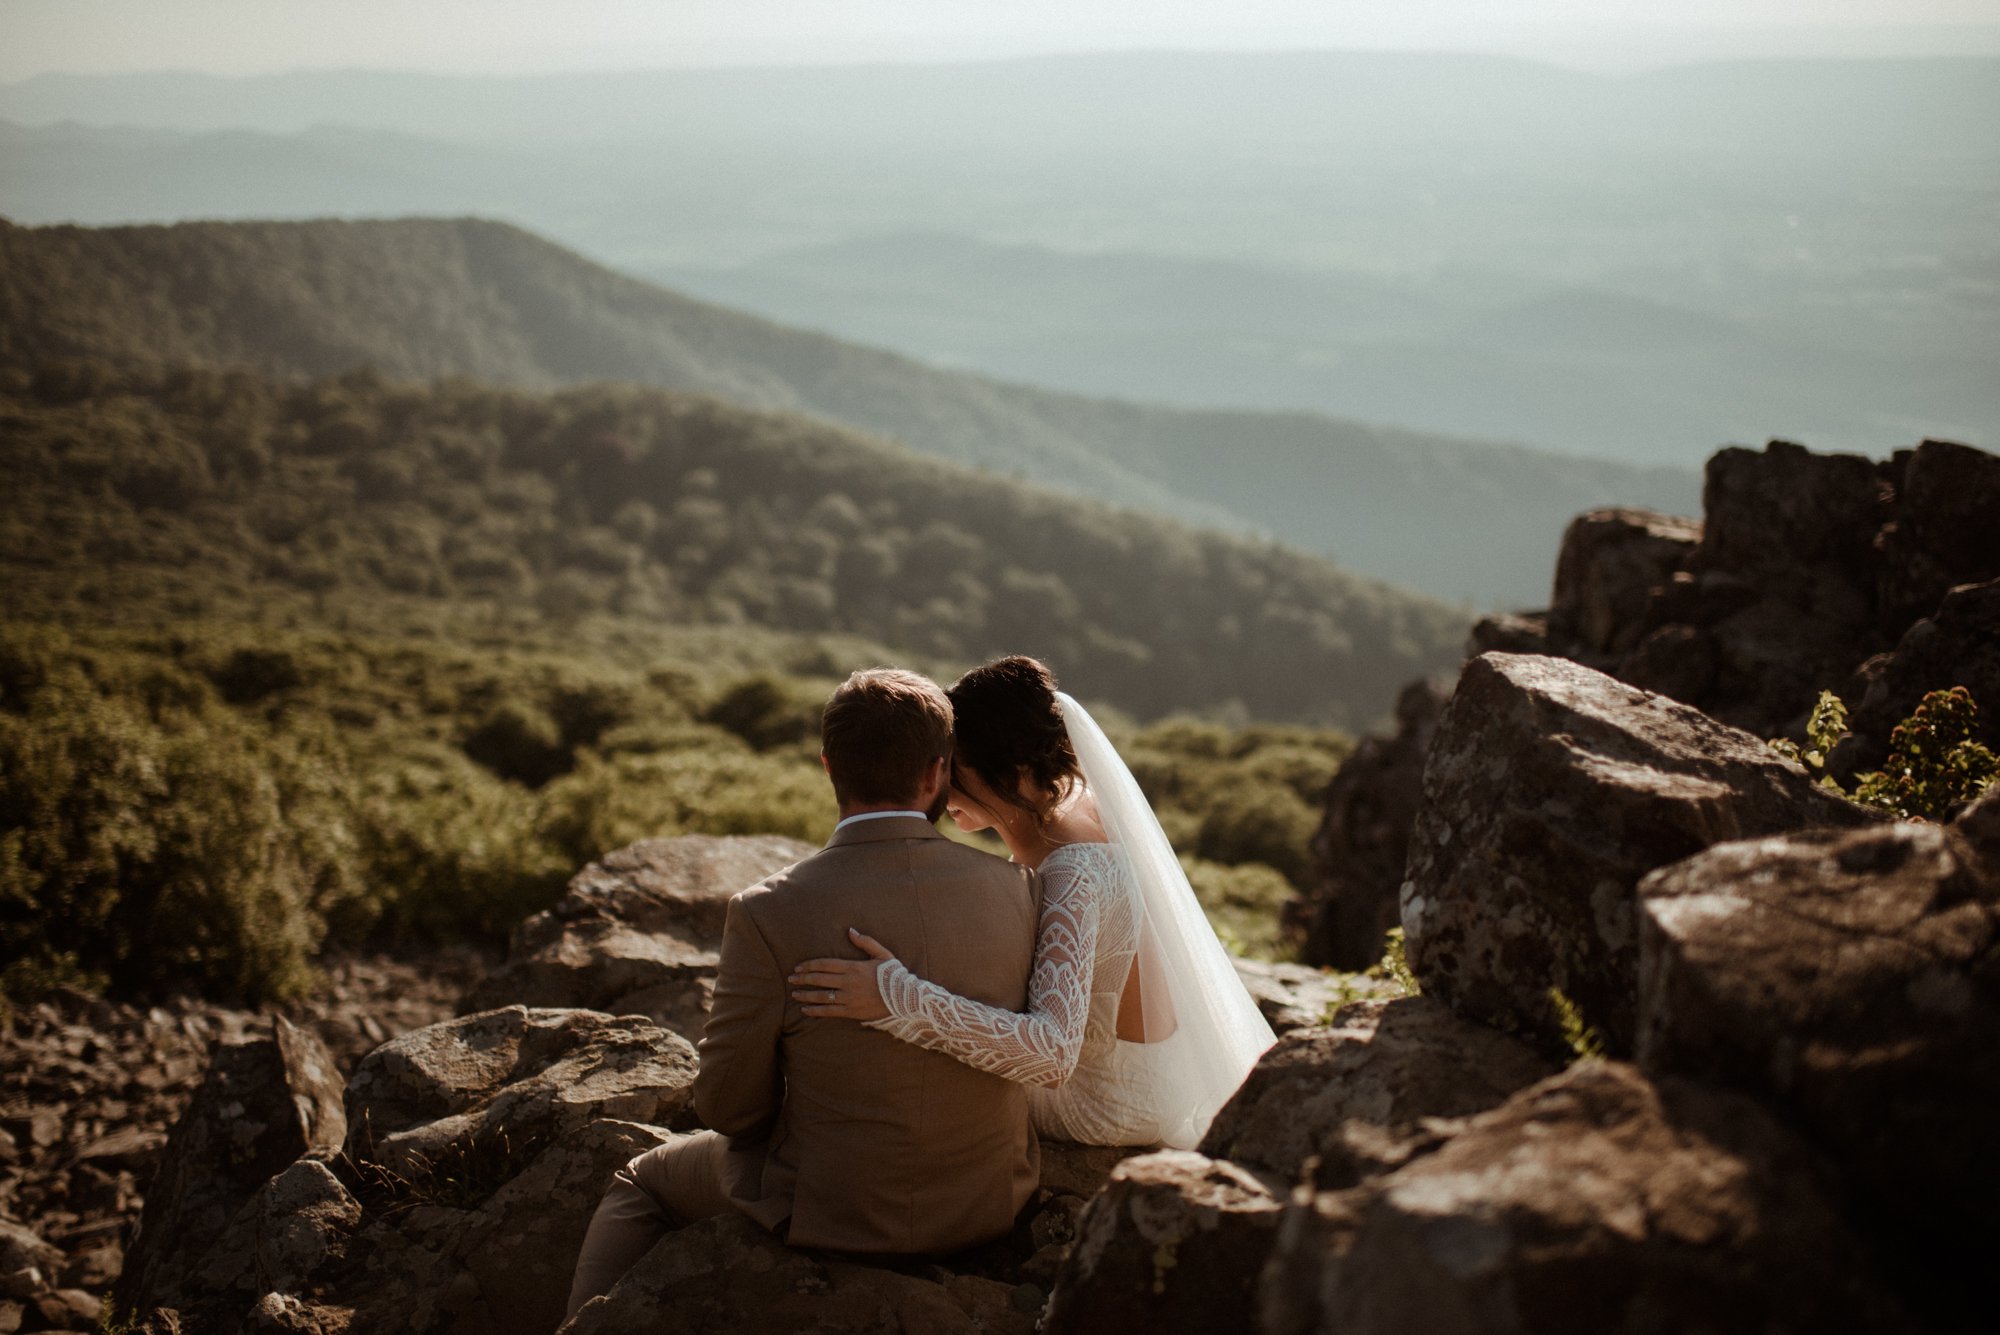 Sunset Elopement on Stony Man Summit in Shenandoah National Park - White Sails Creative Elopement Photography - July Elopement on the Blue Ridge Parkway_17.jpg